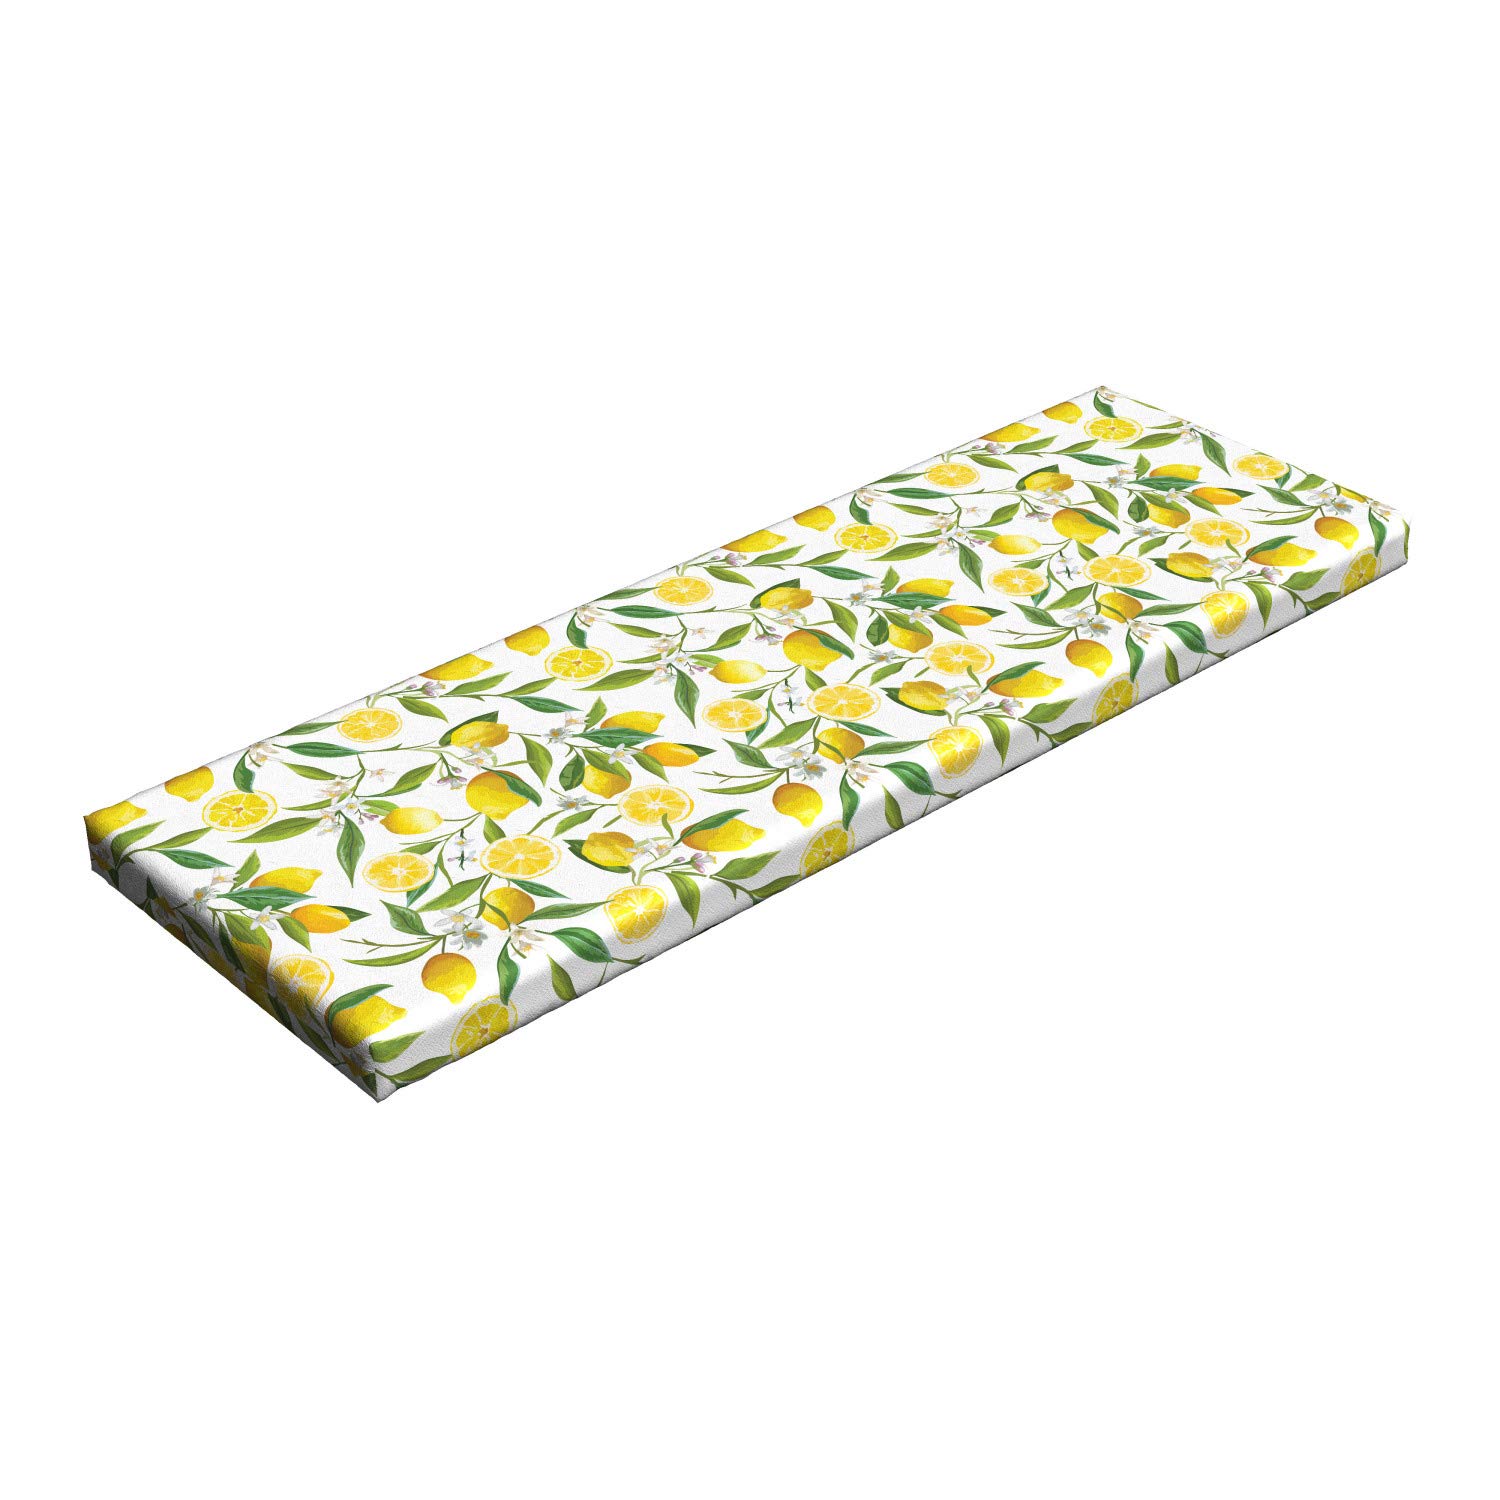 Ambesonne Nature Bench Cushion, Exotic Lemon Tree Branches Yummy Delicious Kitchen Gardening Design, Standard Size Foam Pad with Decorative Fabric Cover, 45" x 15" x 2", Fern Green Yellow White